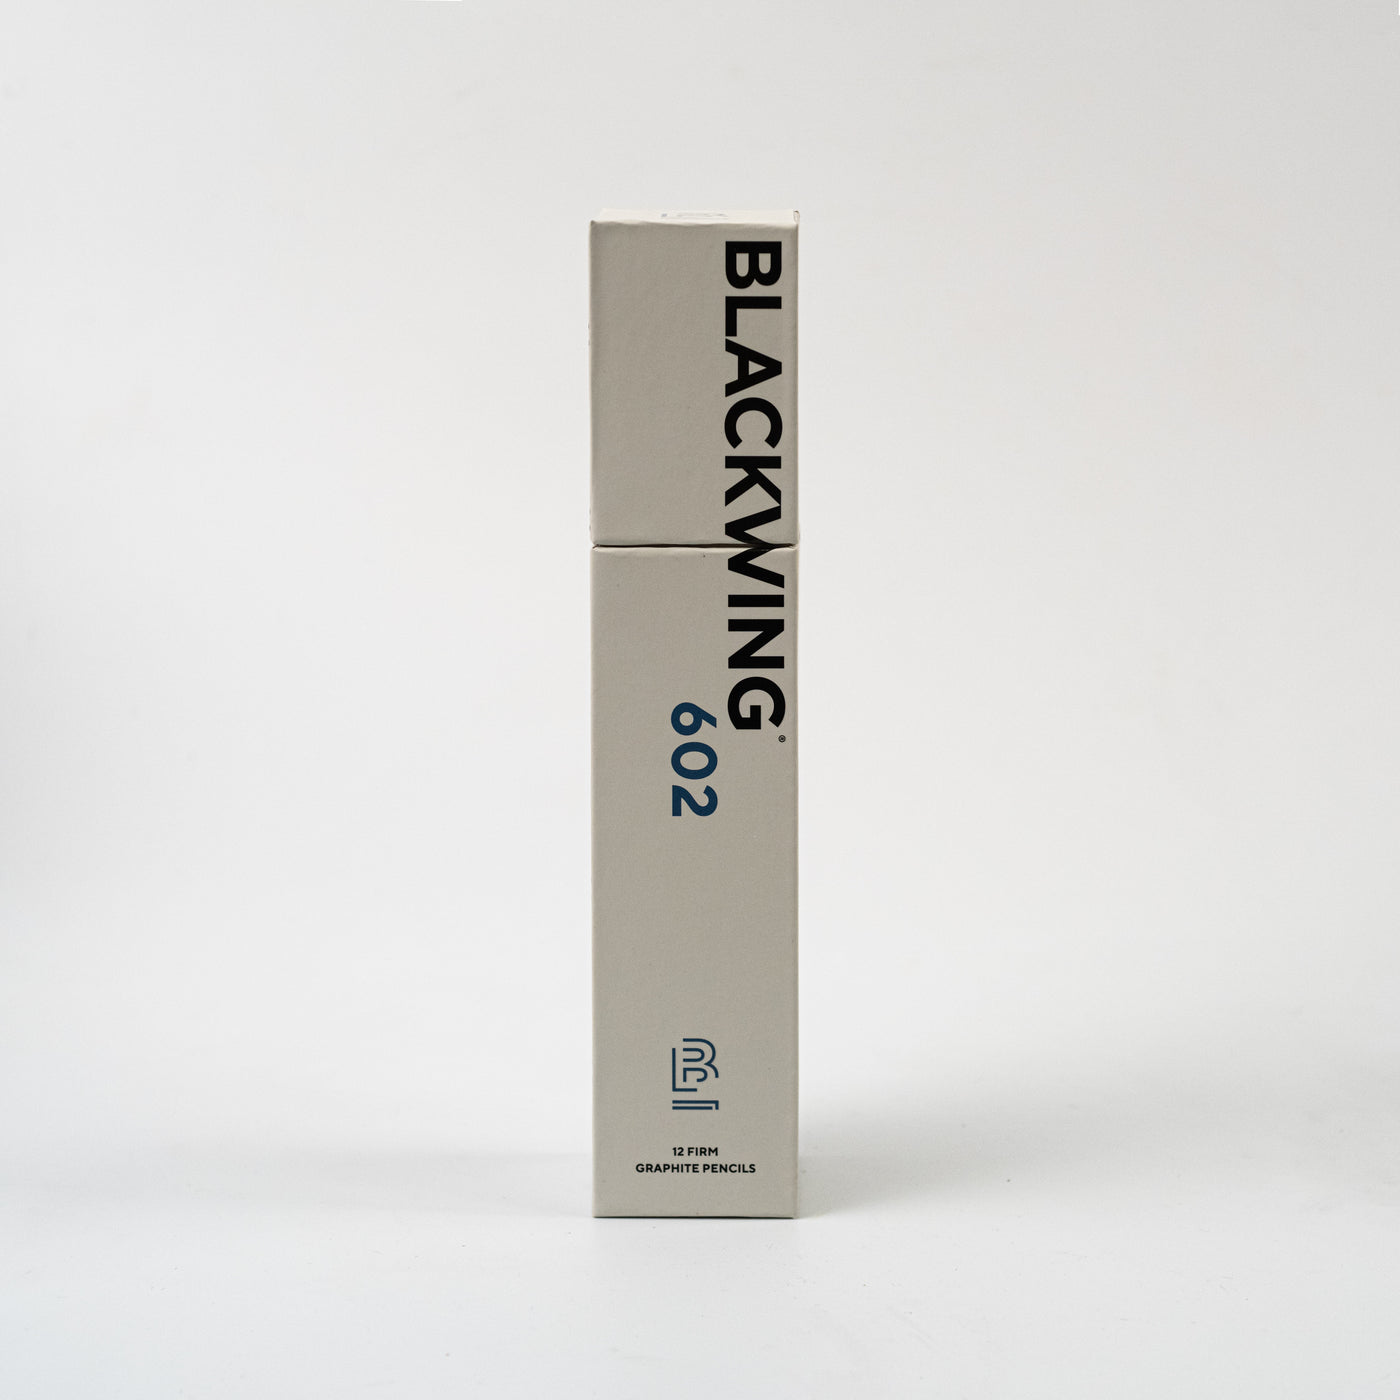 A box of Blackwing 602 pencils (Set of 12) with graphite core against a white background.